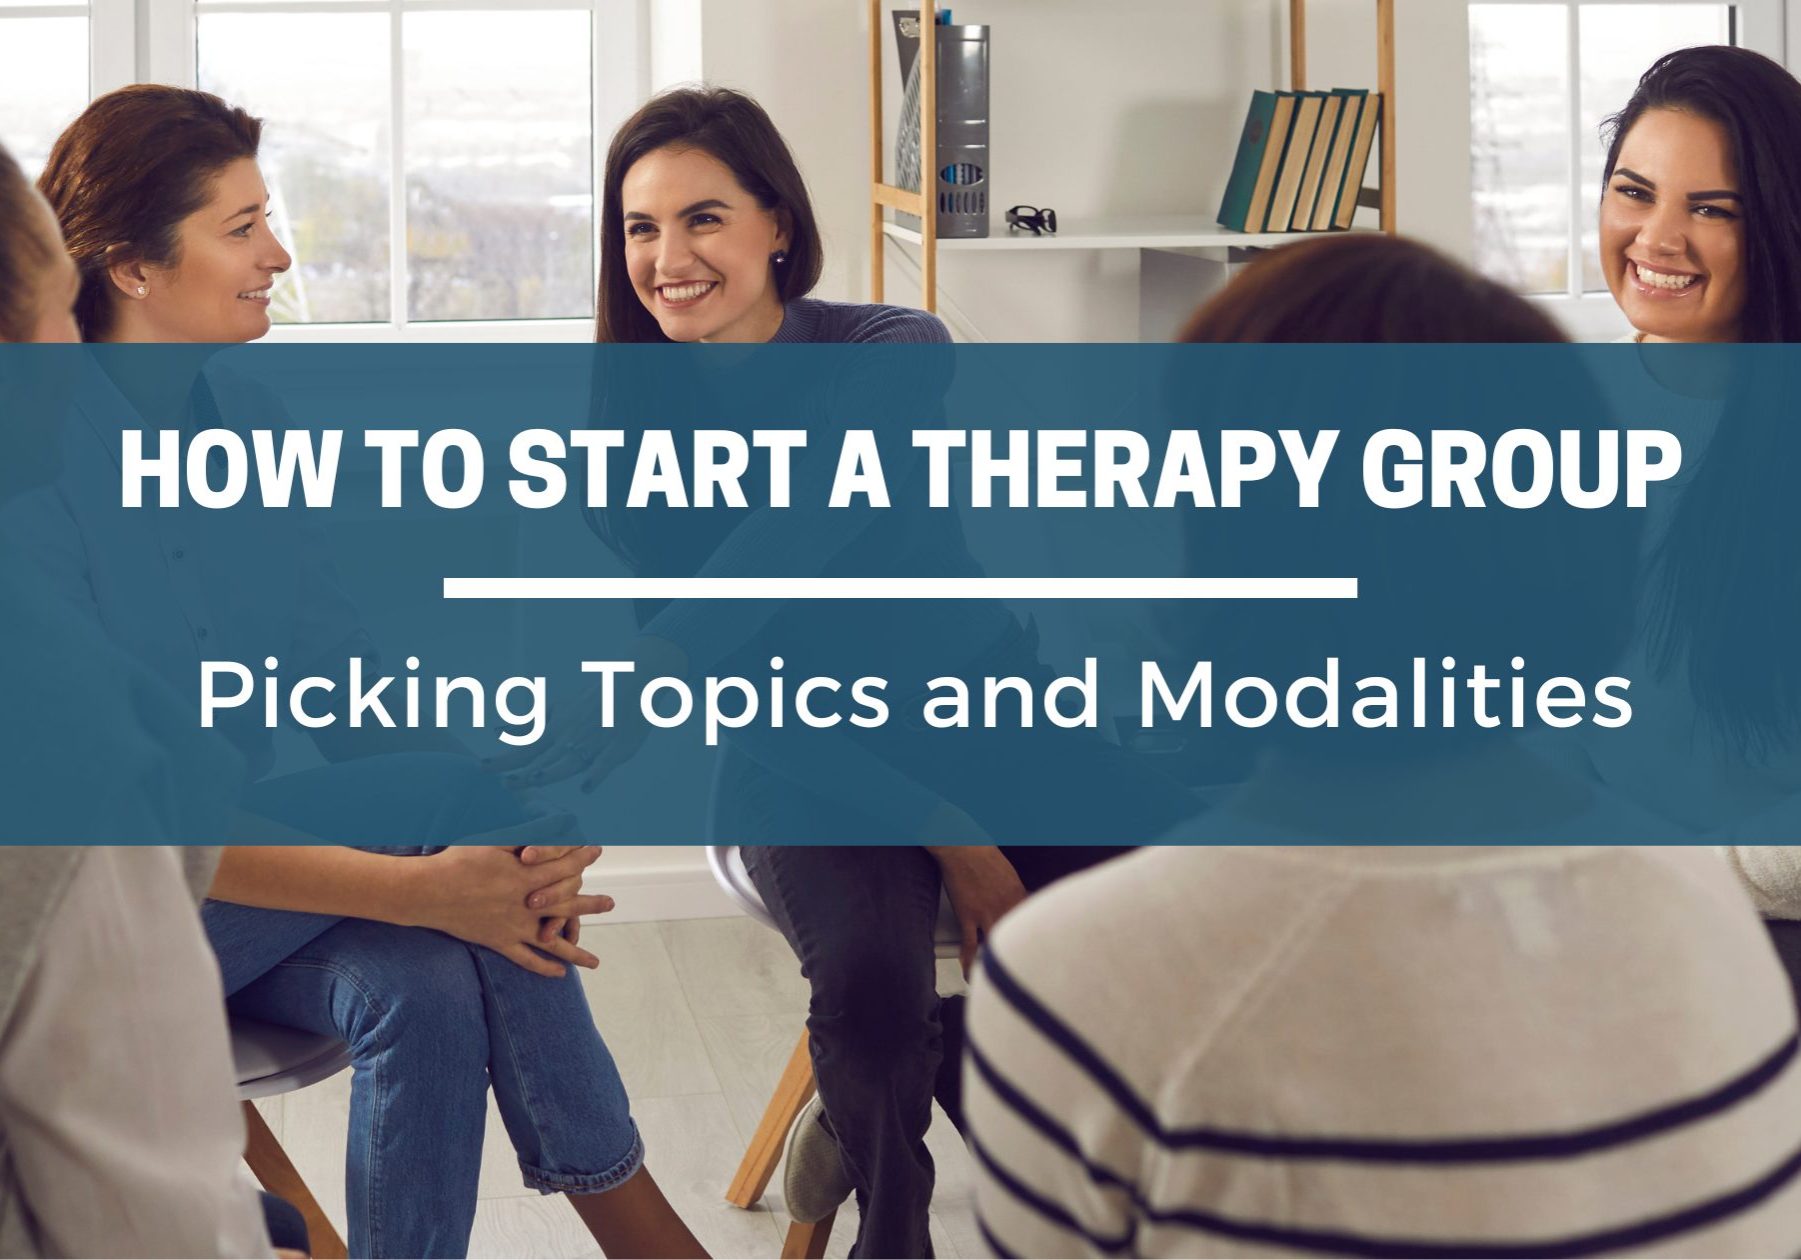 How to Start a Therapy Group